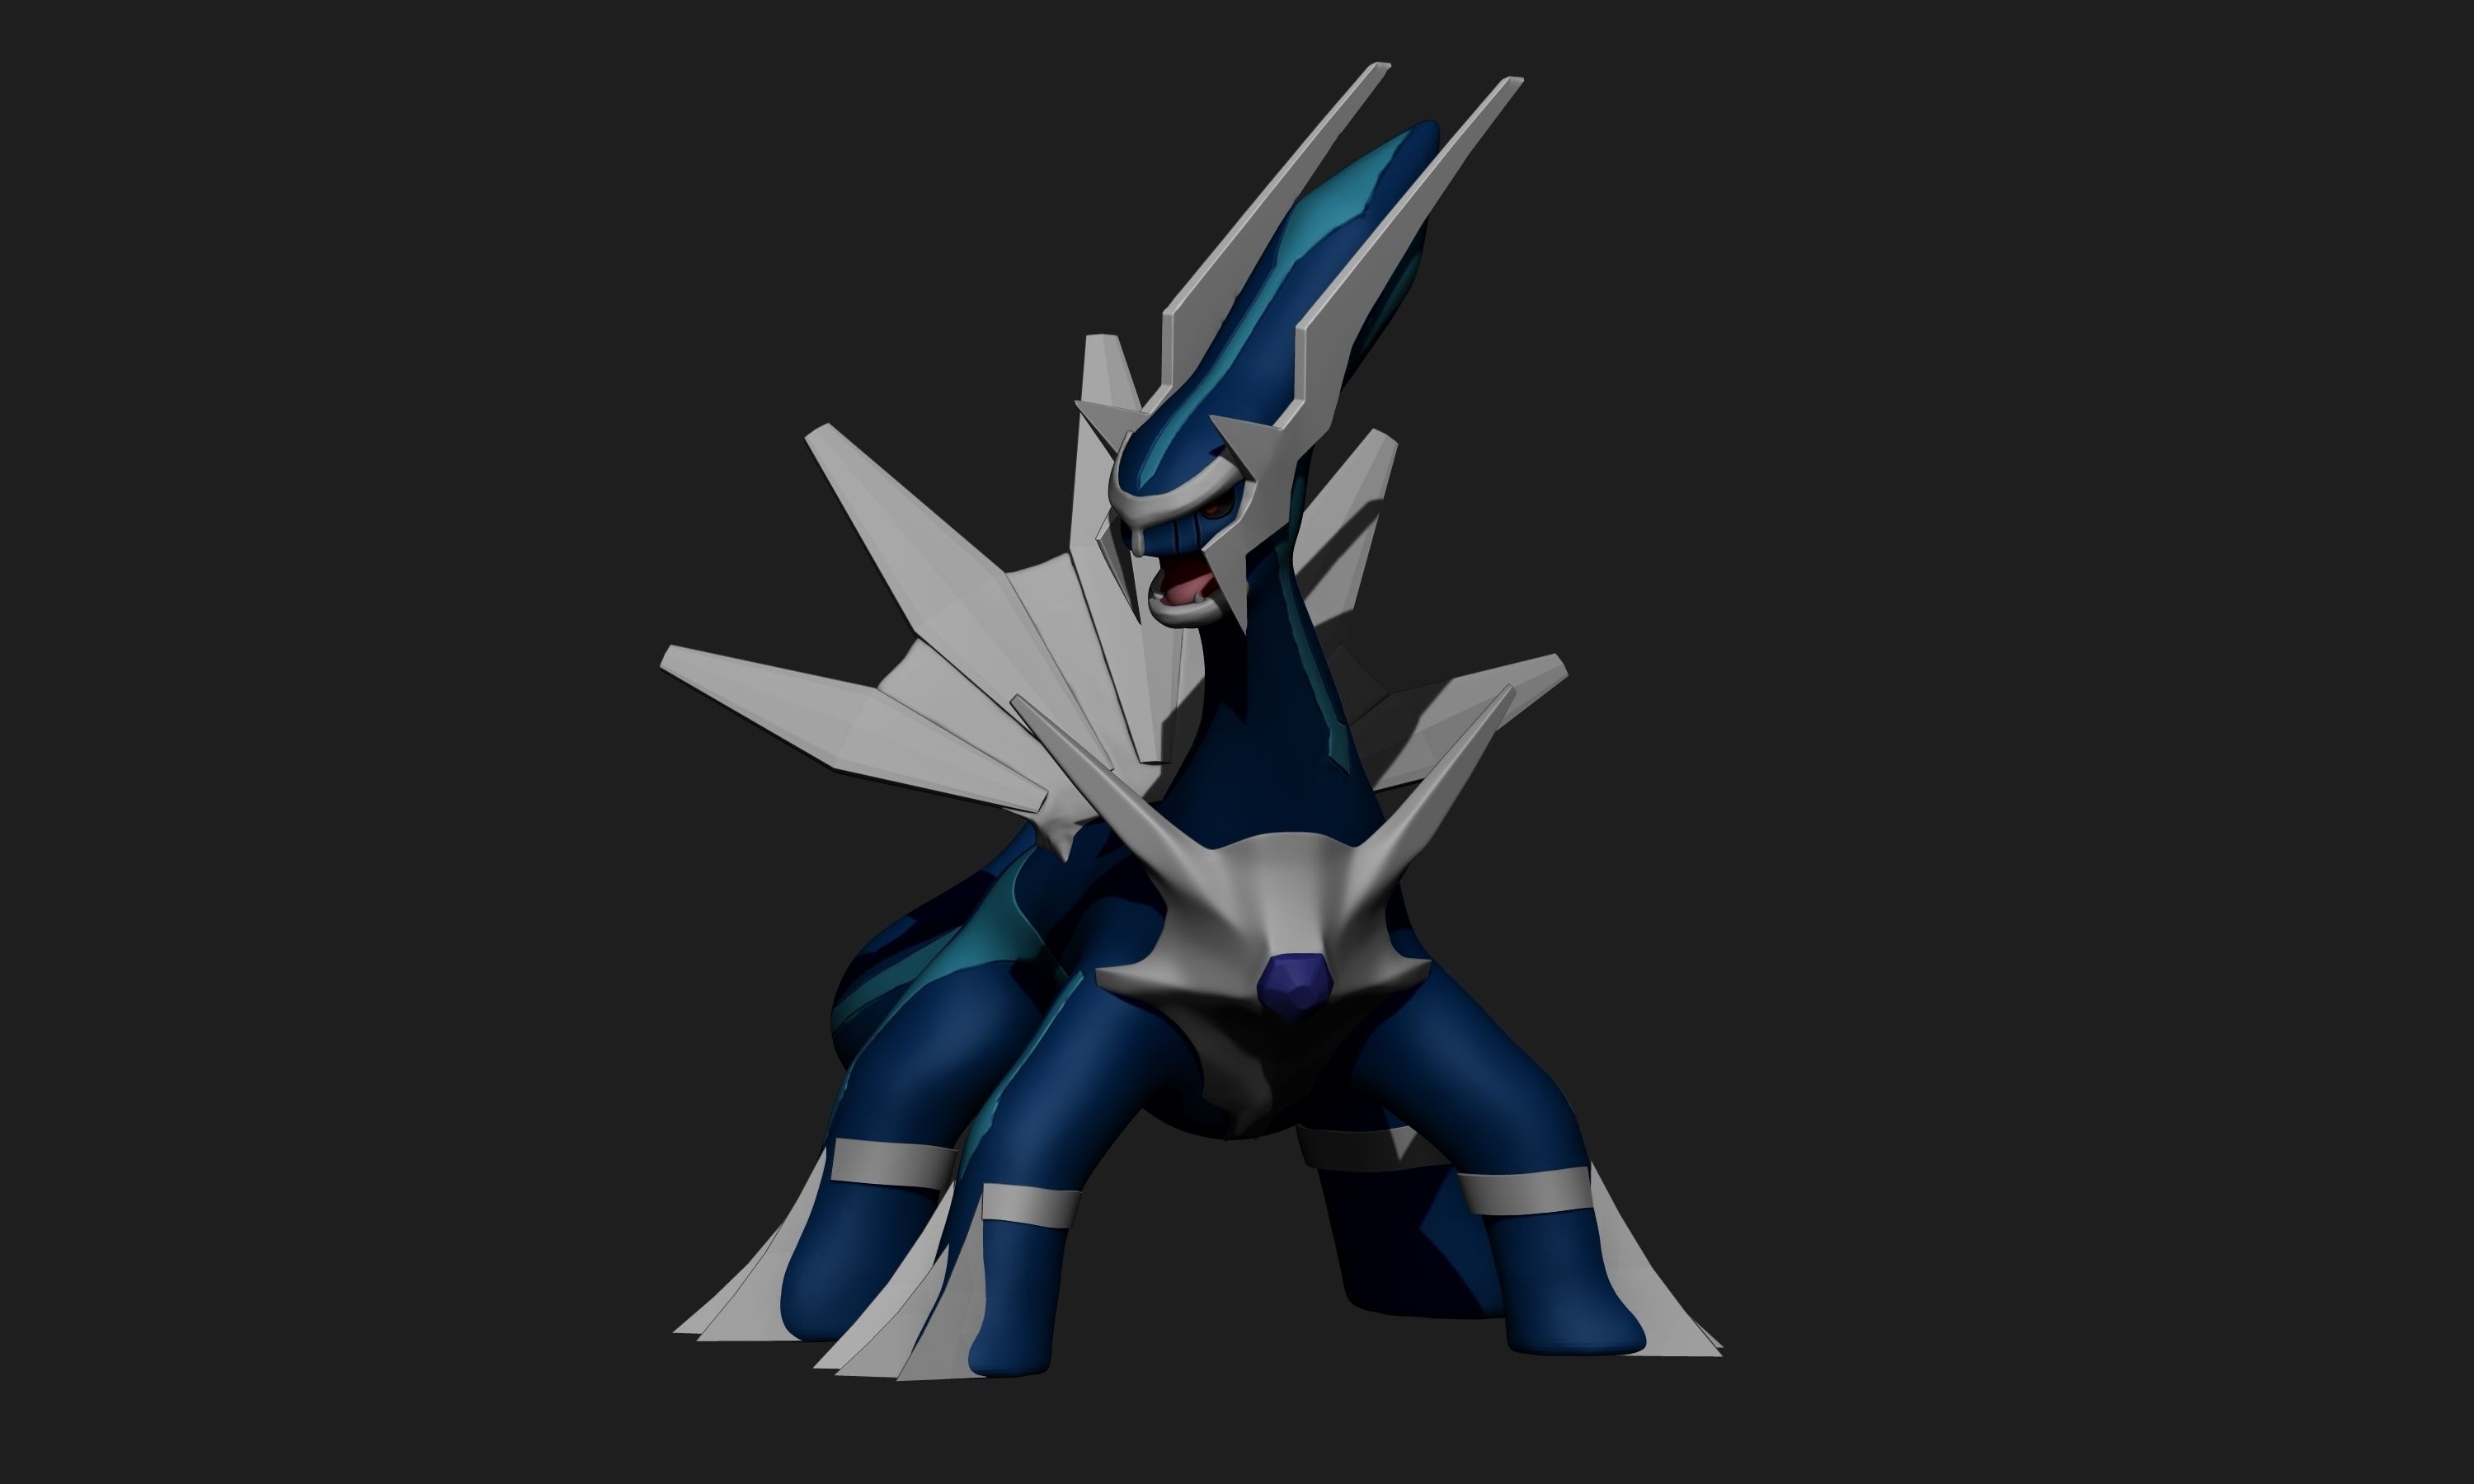 dialga-cliente.jpg Download OBJ file Pokemon - Dialga(with cuts and as a whole) • 3D print object, ErickFontoura3D